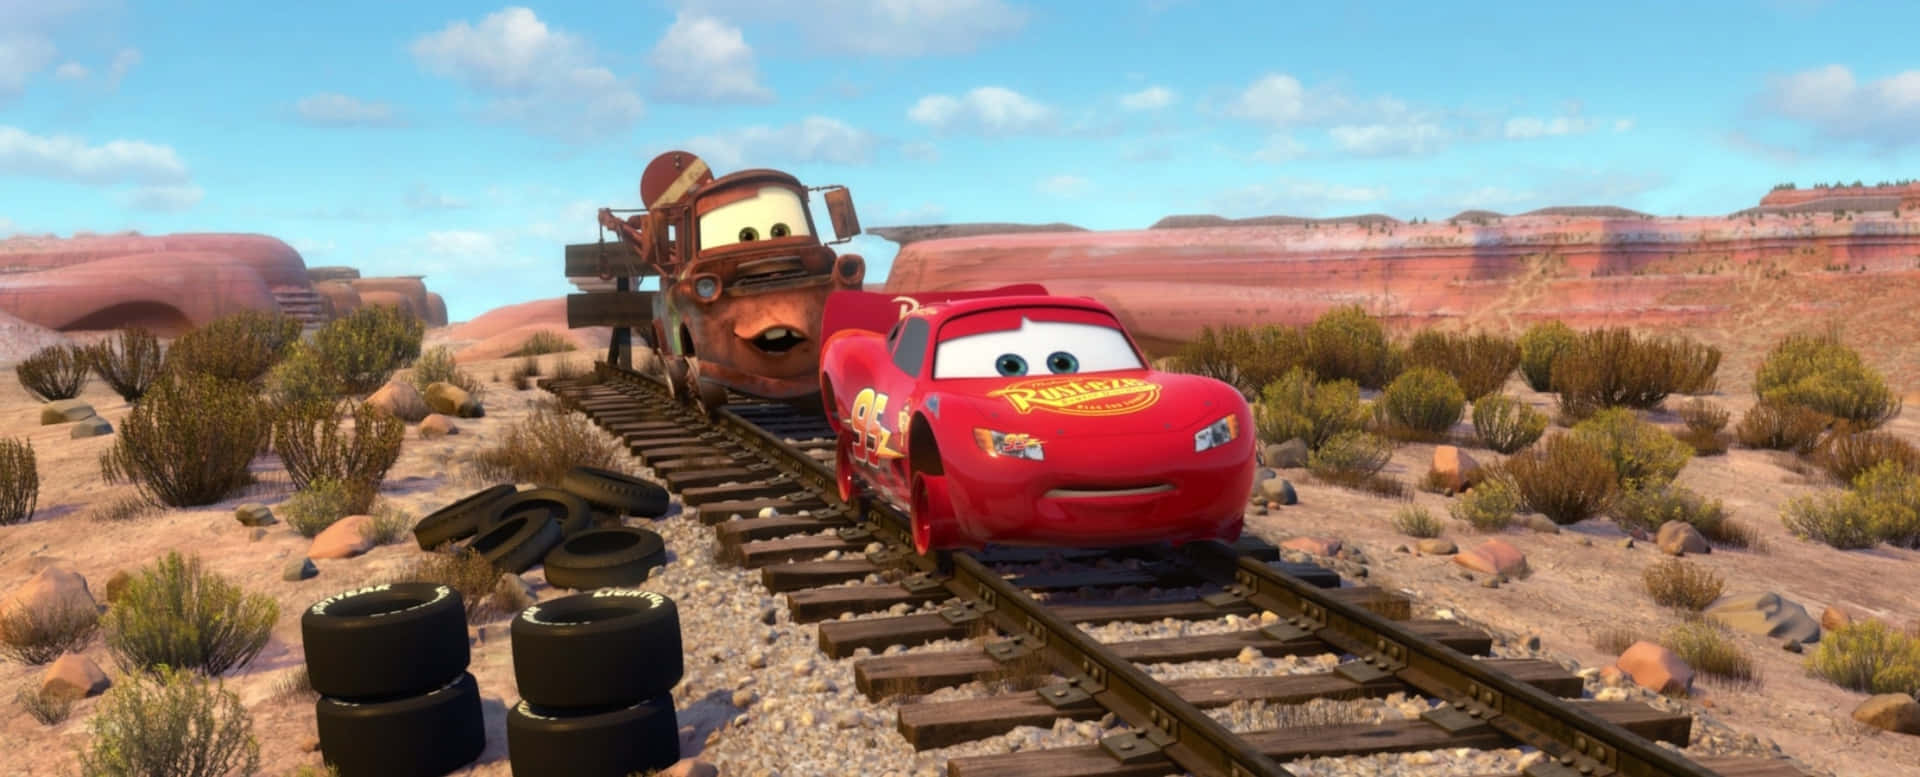 Cars 3 - A Train On The Tracks Wallpaper